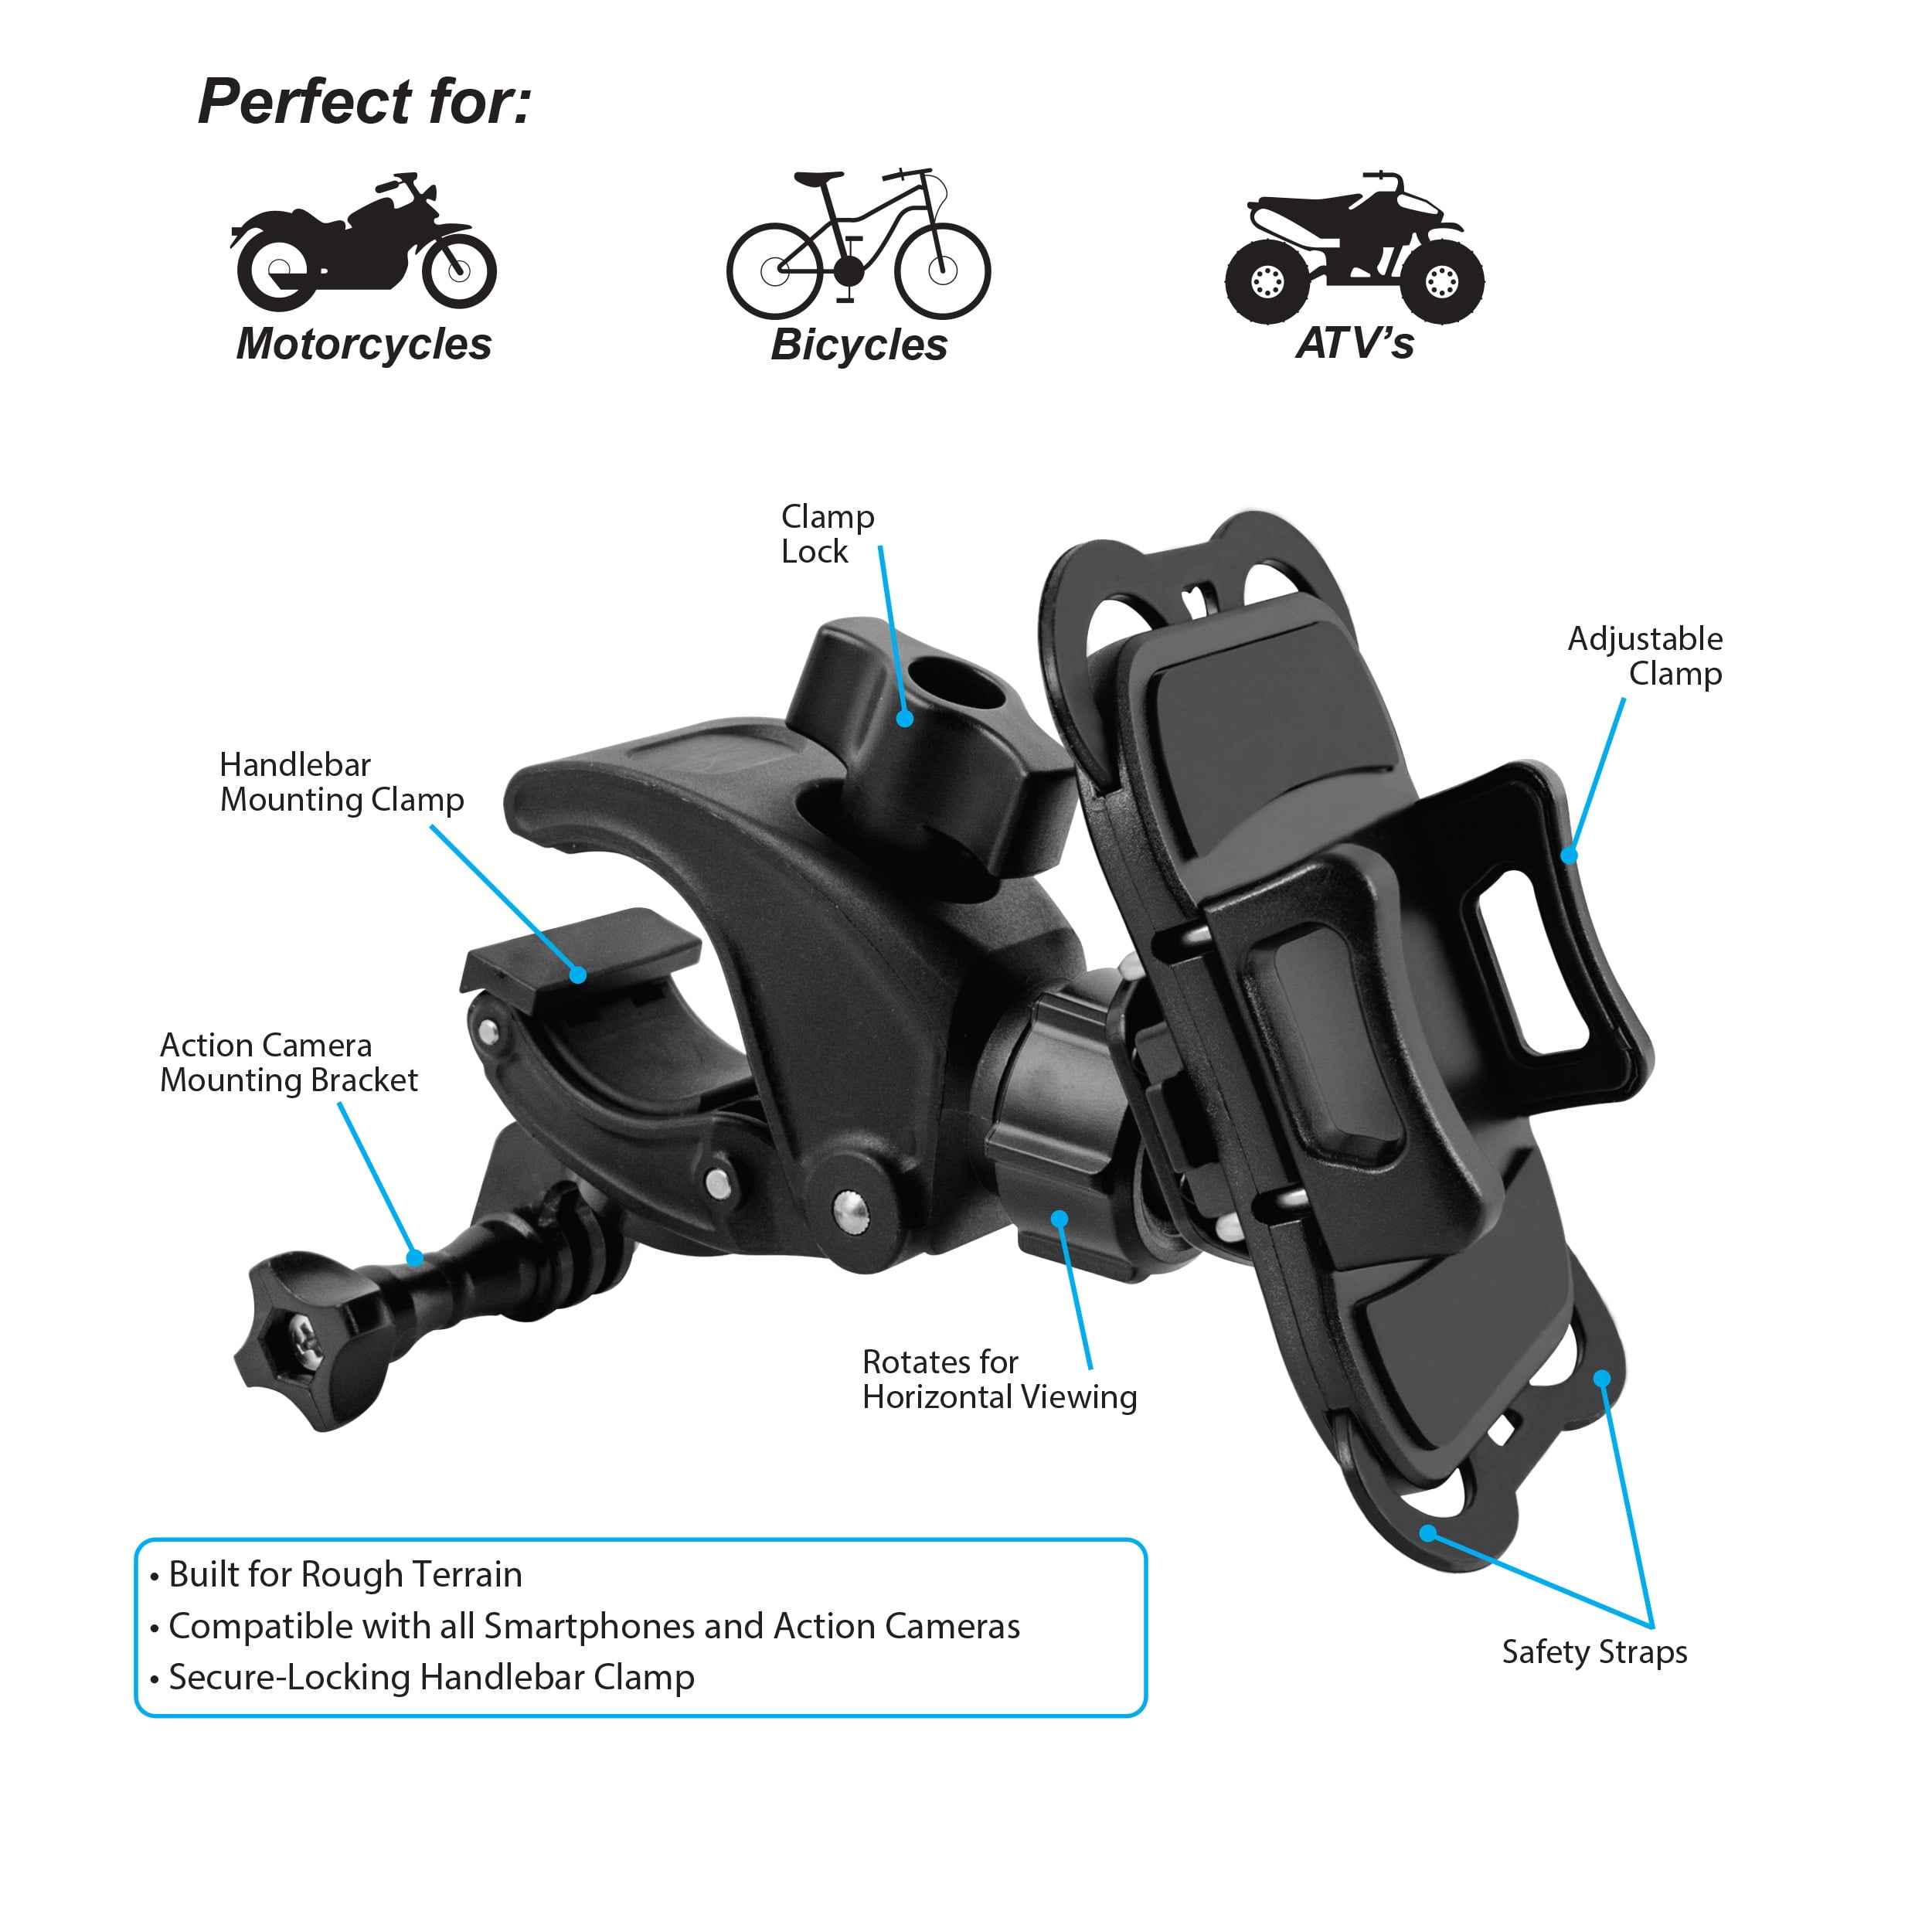 etc. Samsung Adjustable to Fit All Motorcycle and Harley Davidson Silver Metal Phone Mount for Motorcycle Handlebars with Camera Mount,Universal Anti Vibration Aluminum Holder for iPhone 